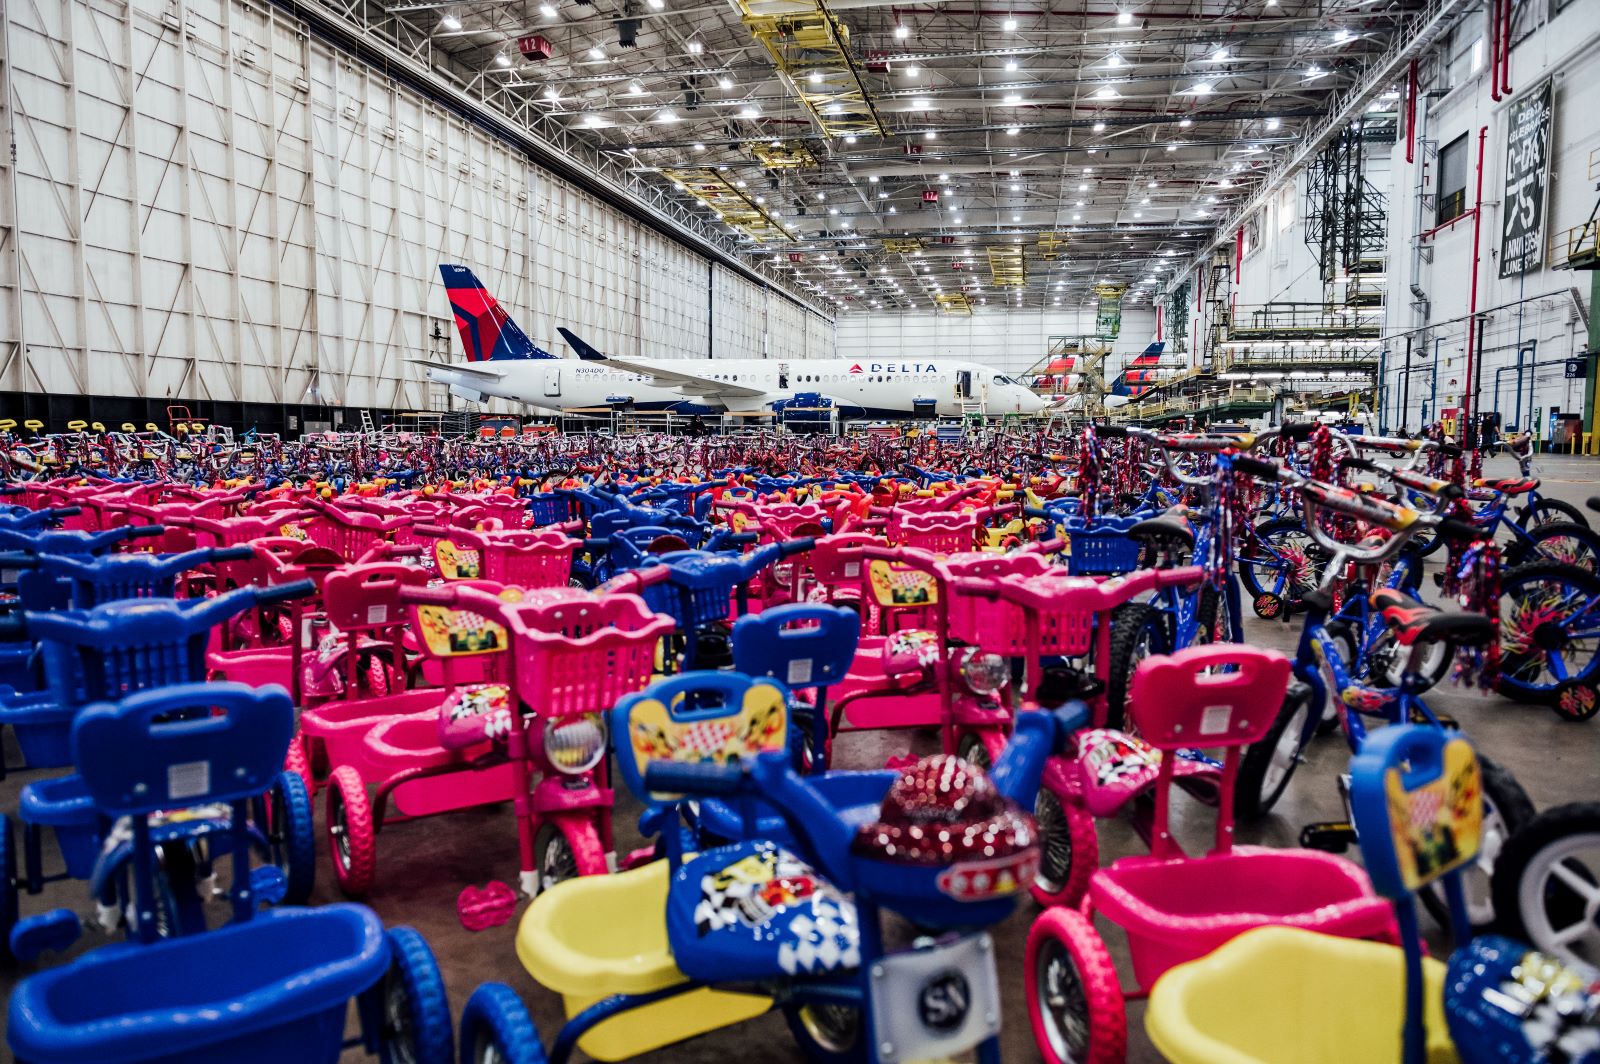 Bikes TechOps 2020 Toys for Tots - Courtesy Delta Air Lines